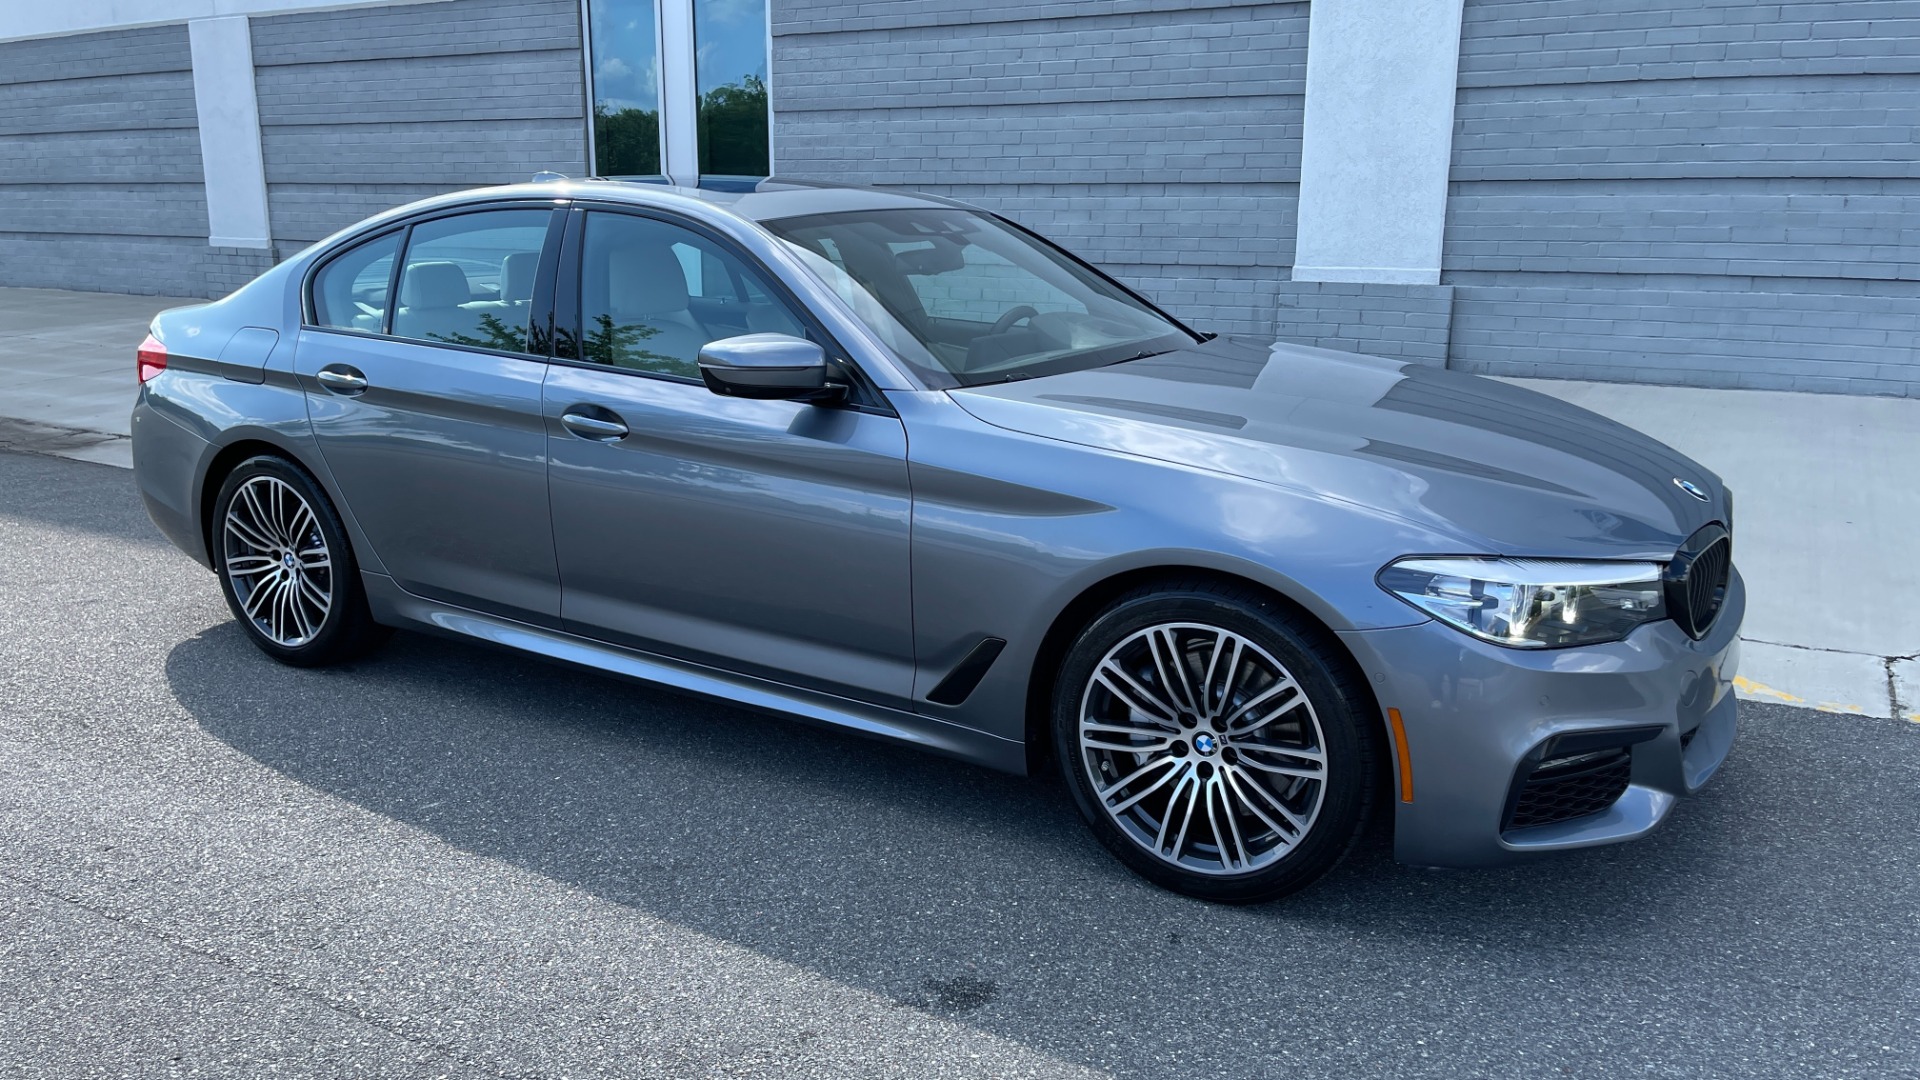 Used 2019 BMW 5 Series 540i xDrive / M SPORT PACKAGE / PREMIUM 2 PACKAGE / HARMAN KARDON SOUND / H for sale $44,995 at Formula Imports in Charlotte NC 28227 3